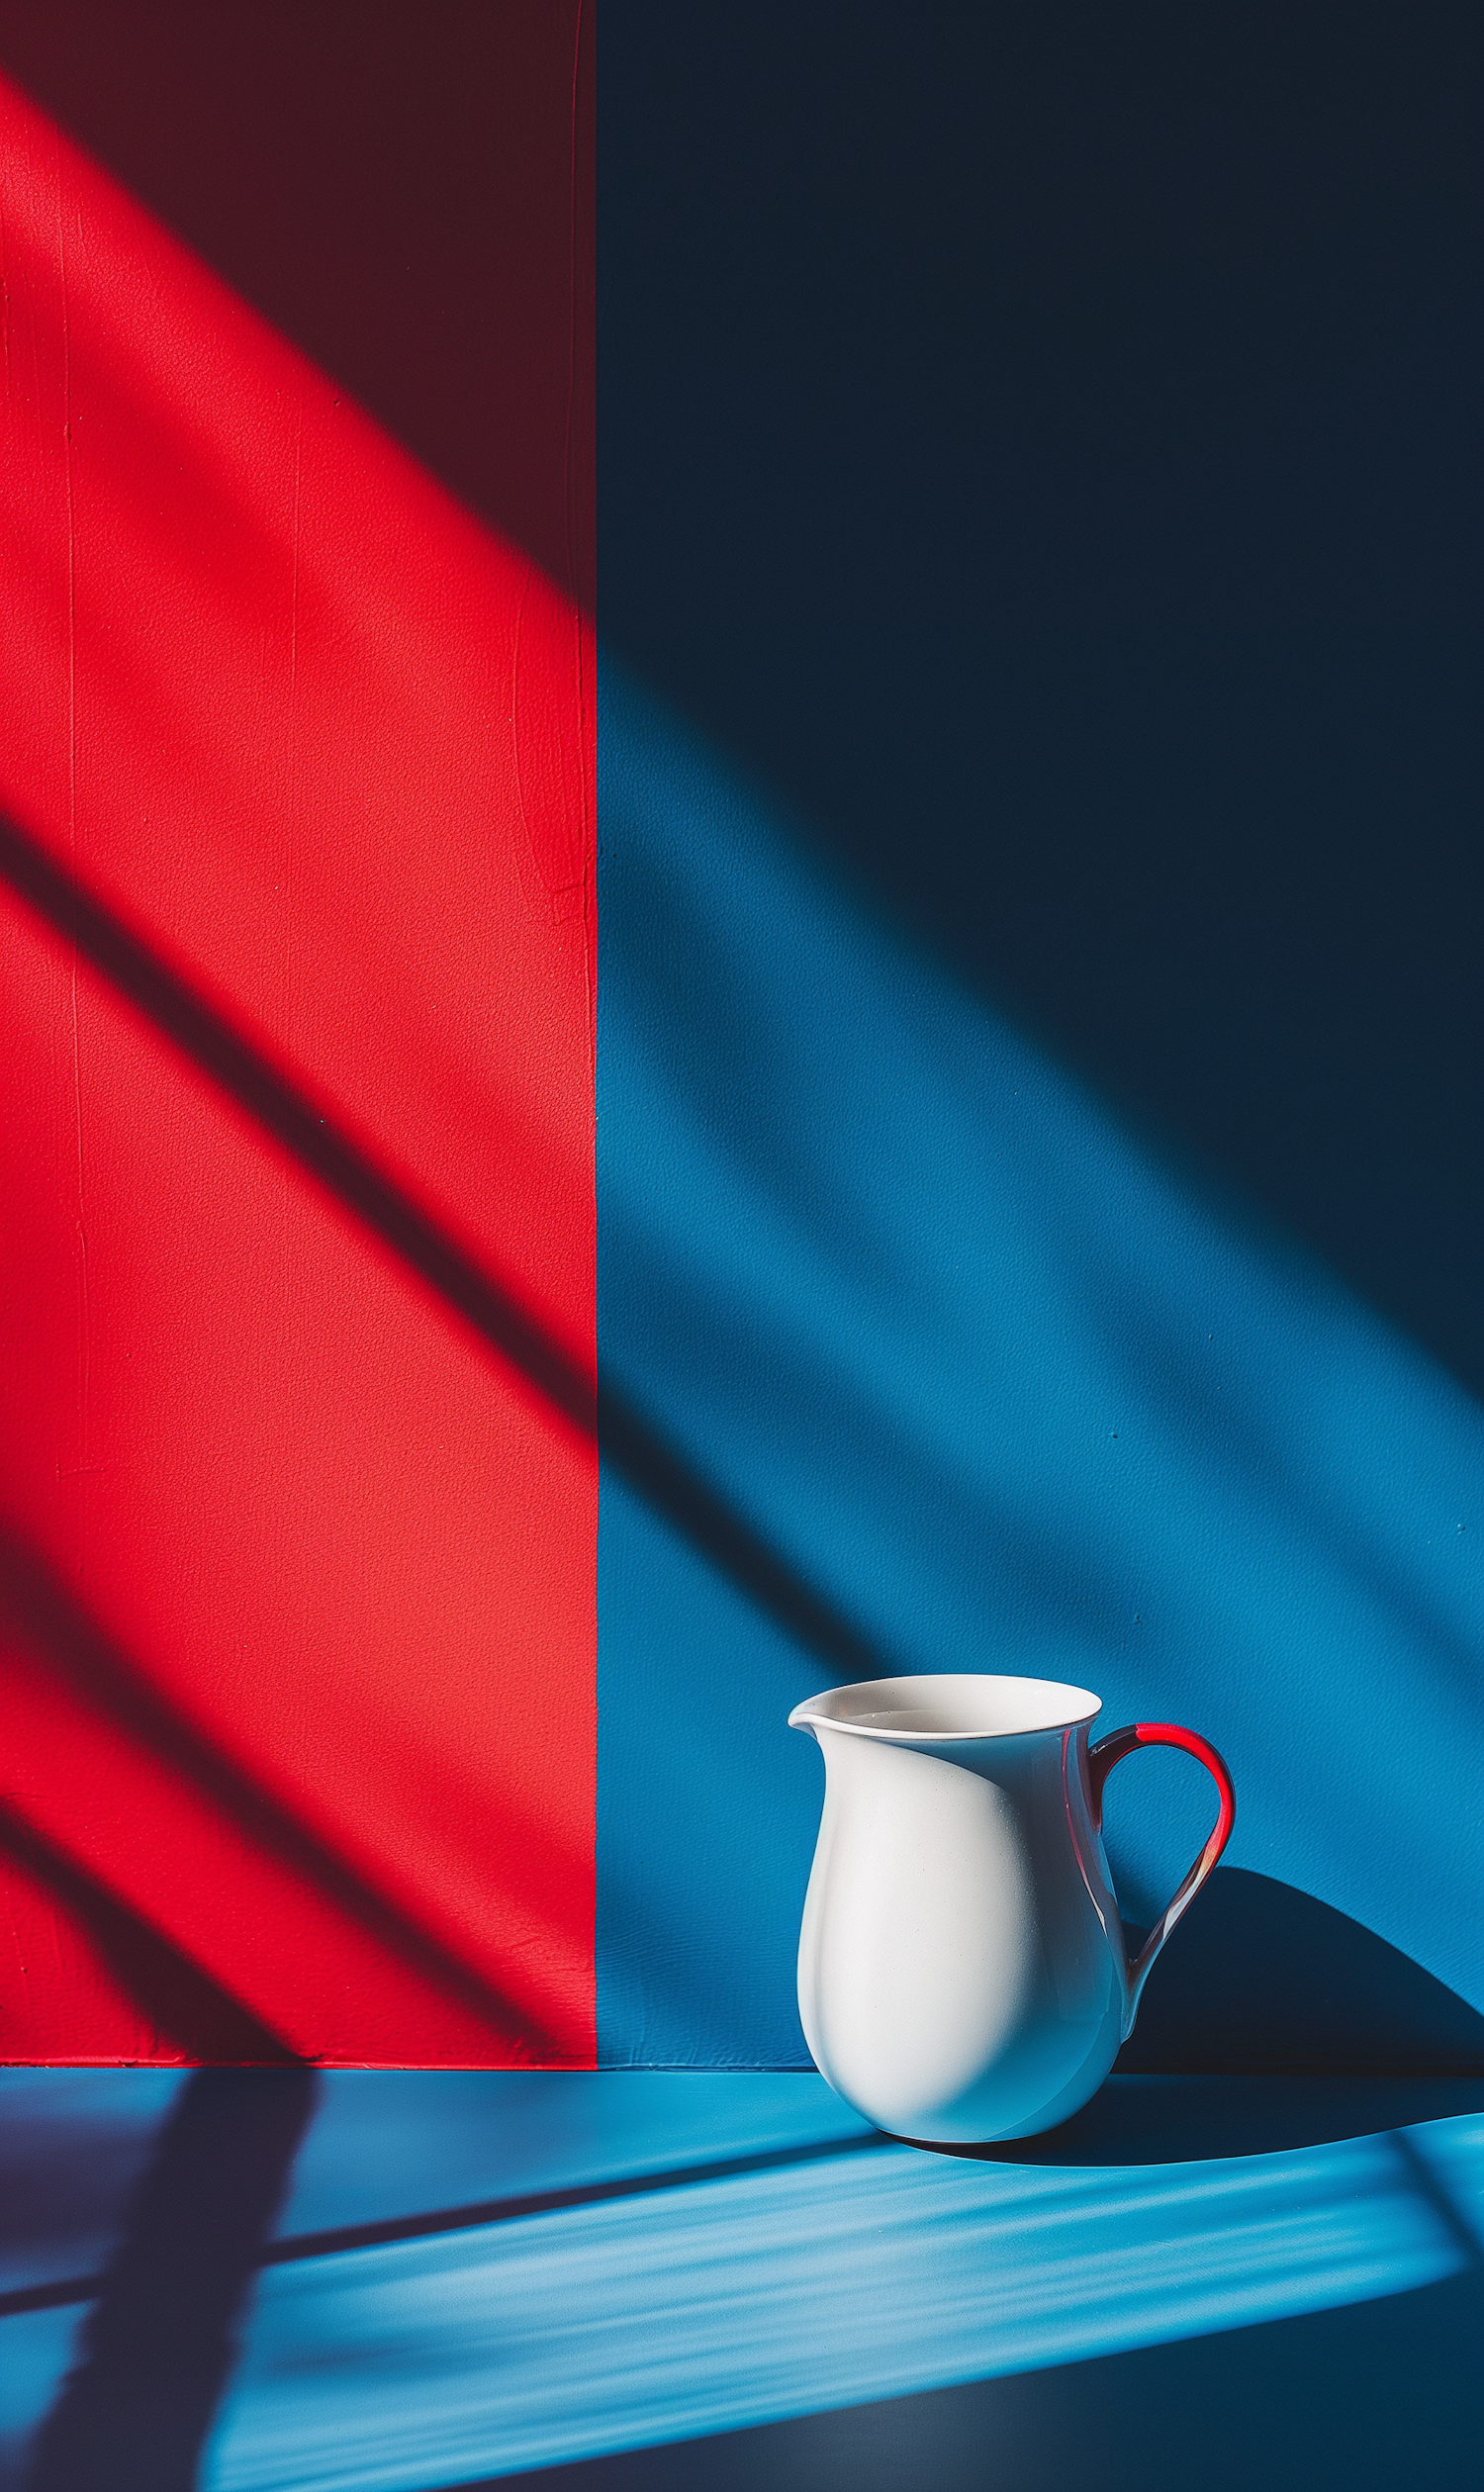 Minimalist Pitcher with Colorful Background